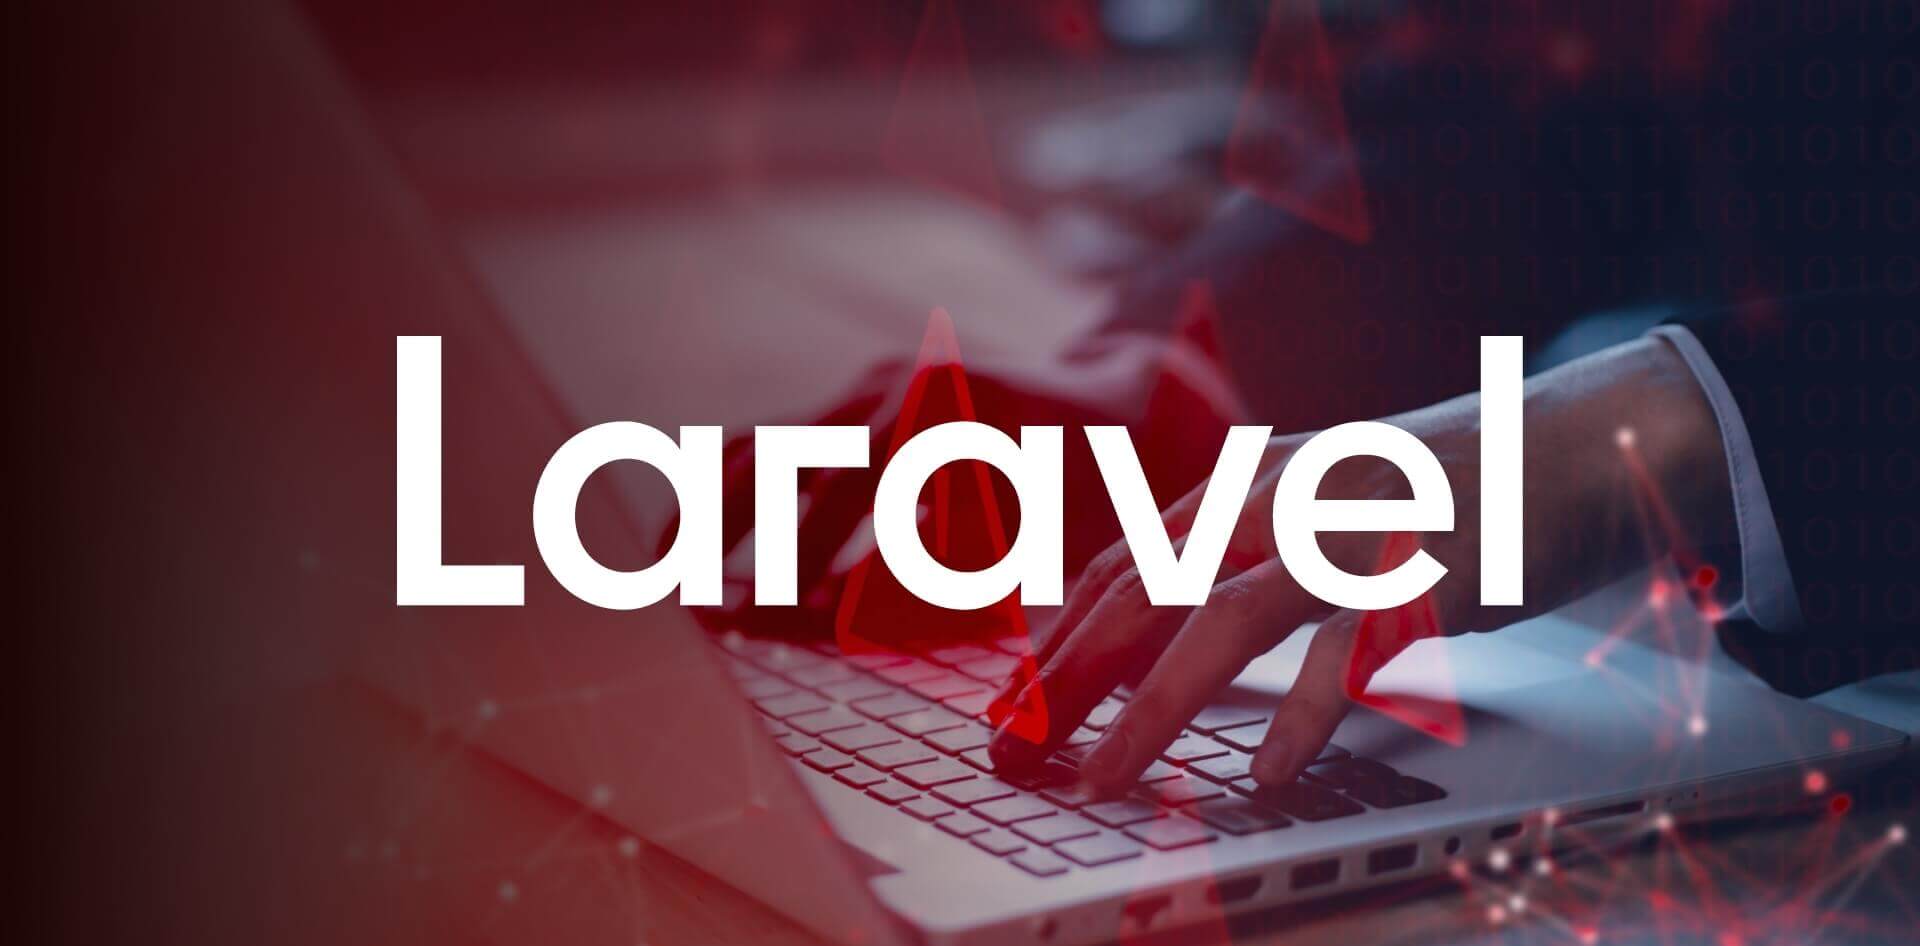 Is It the End of Laravel